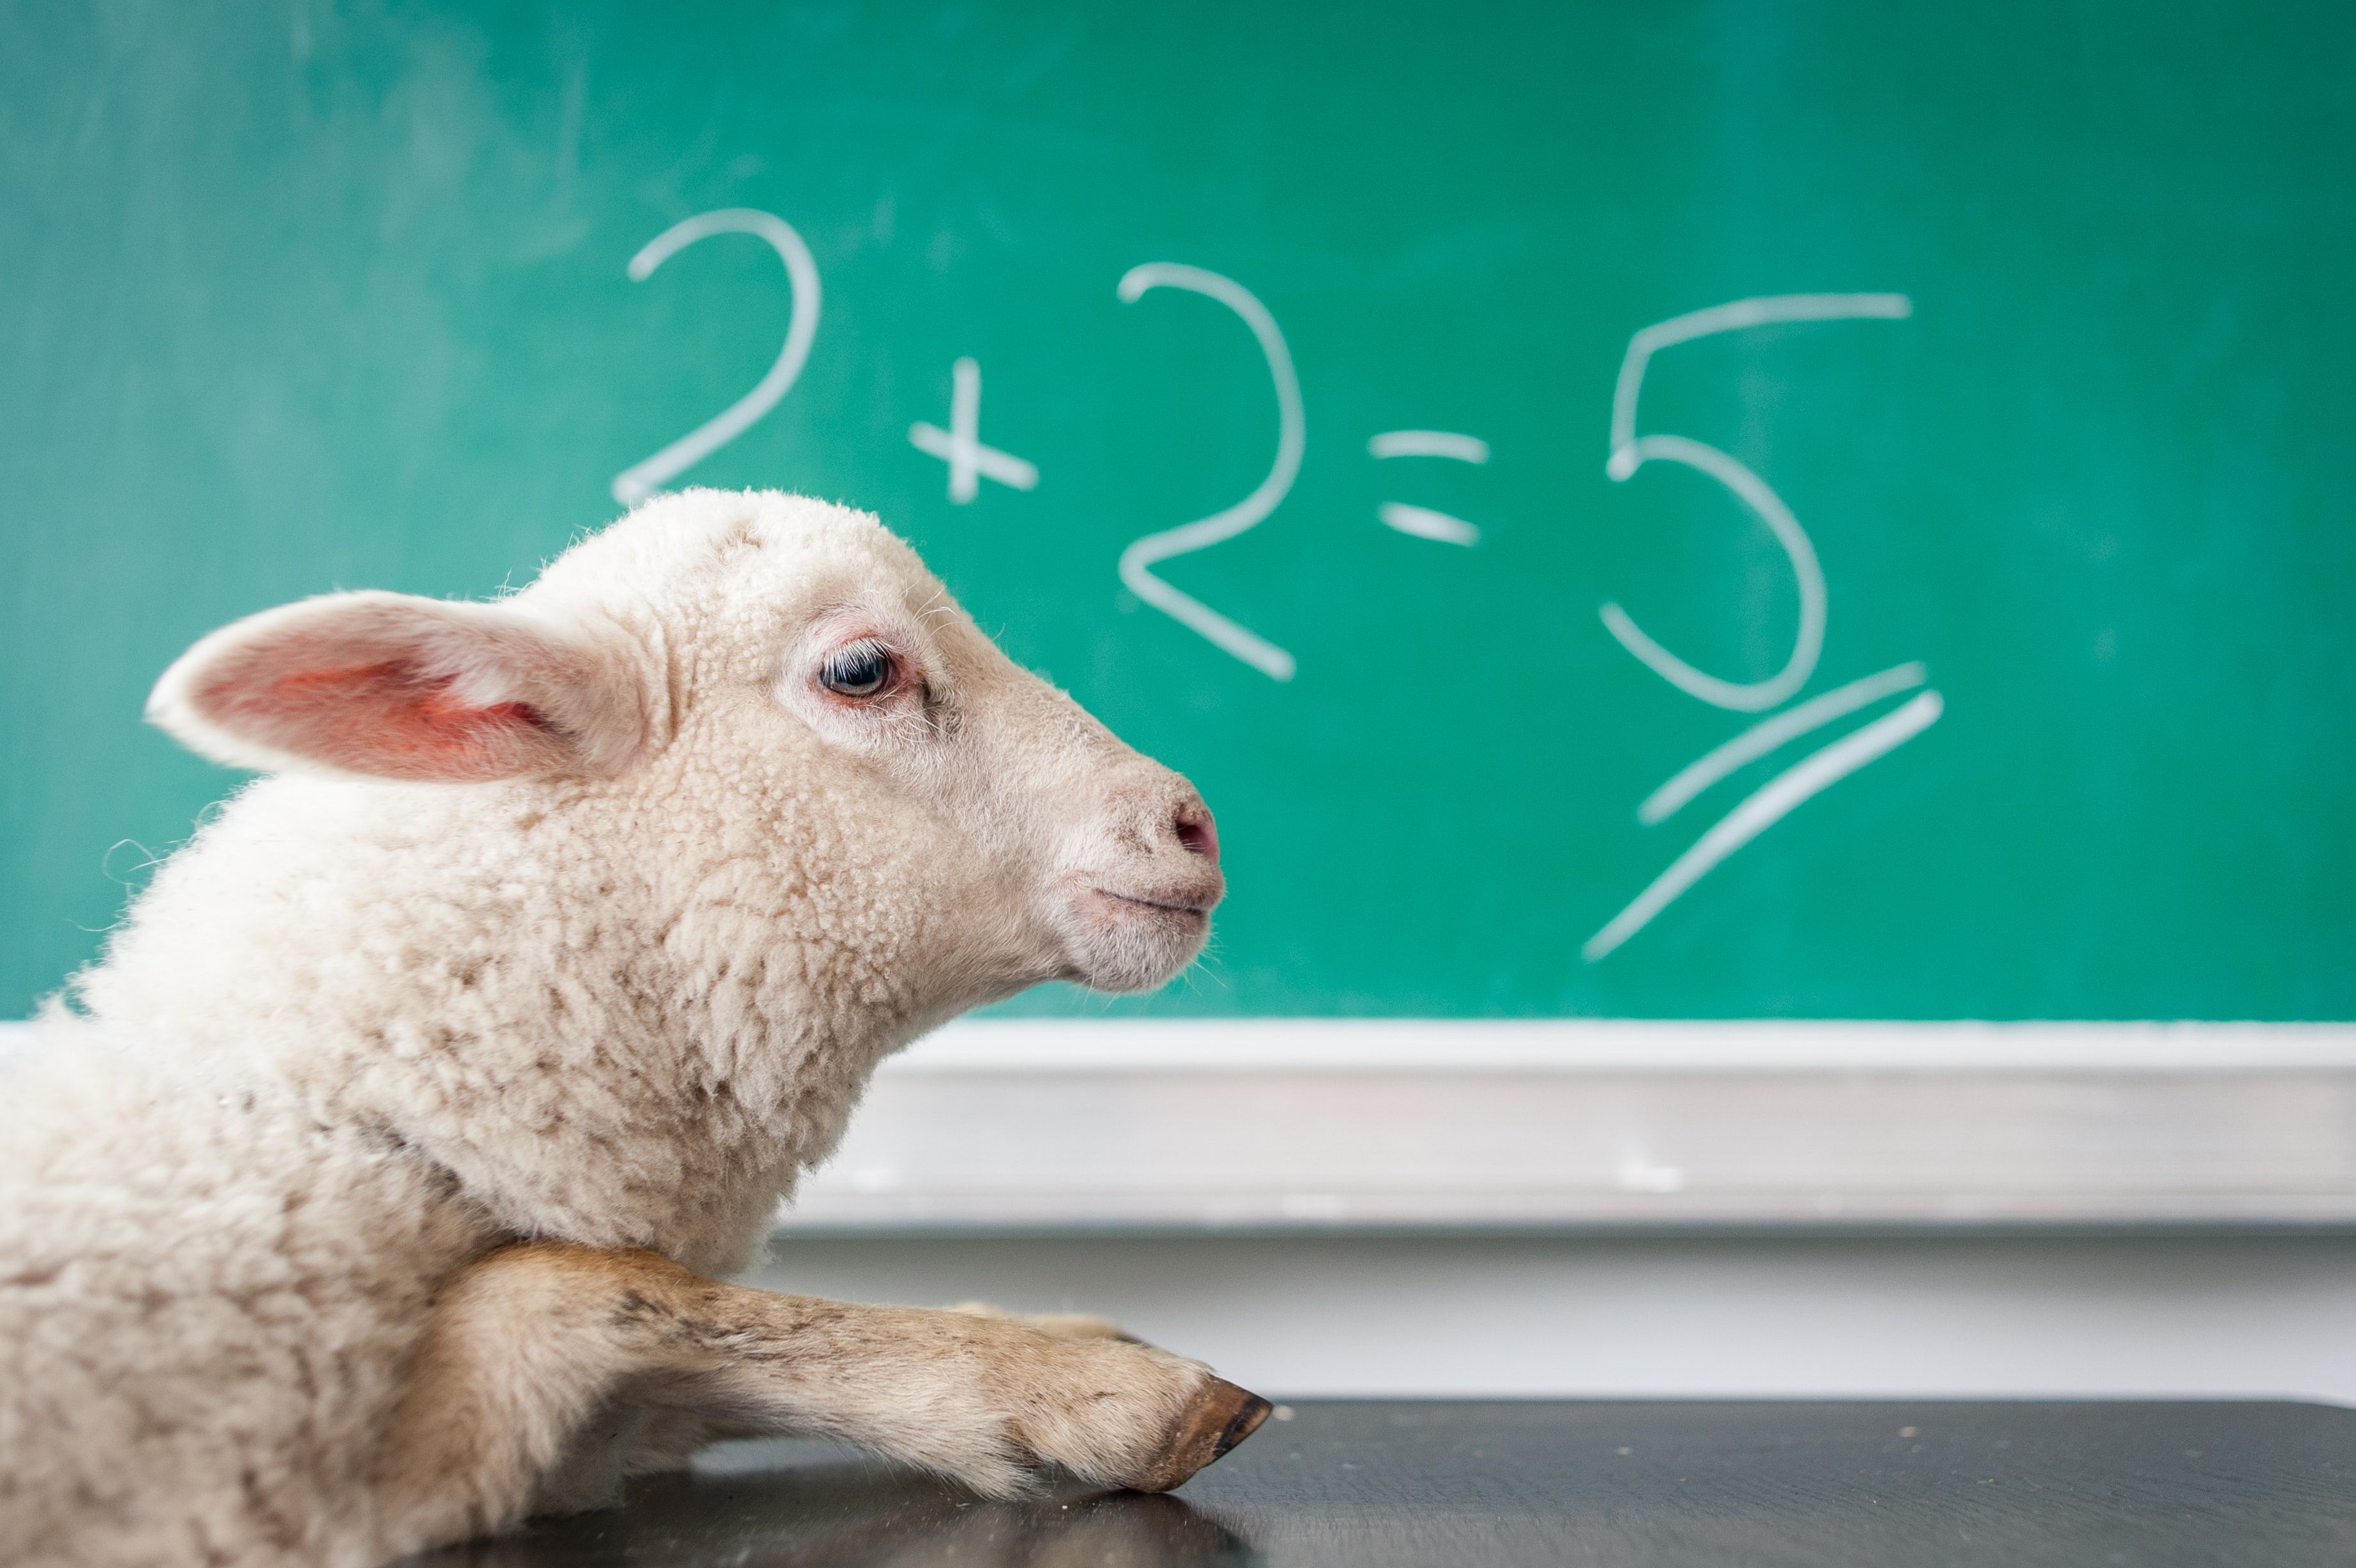 Sheep in front of maths text